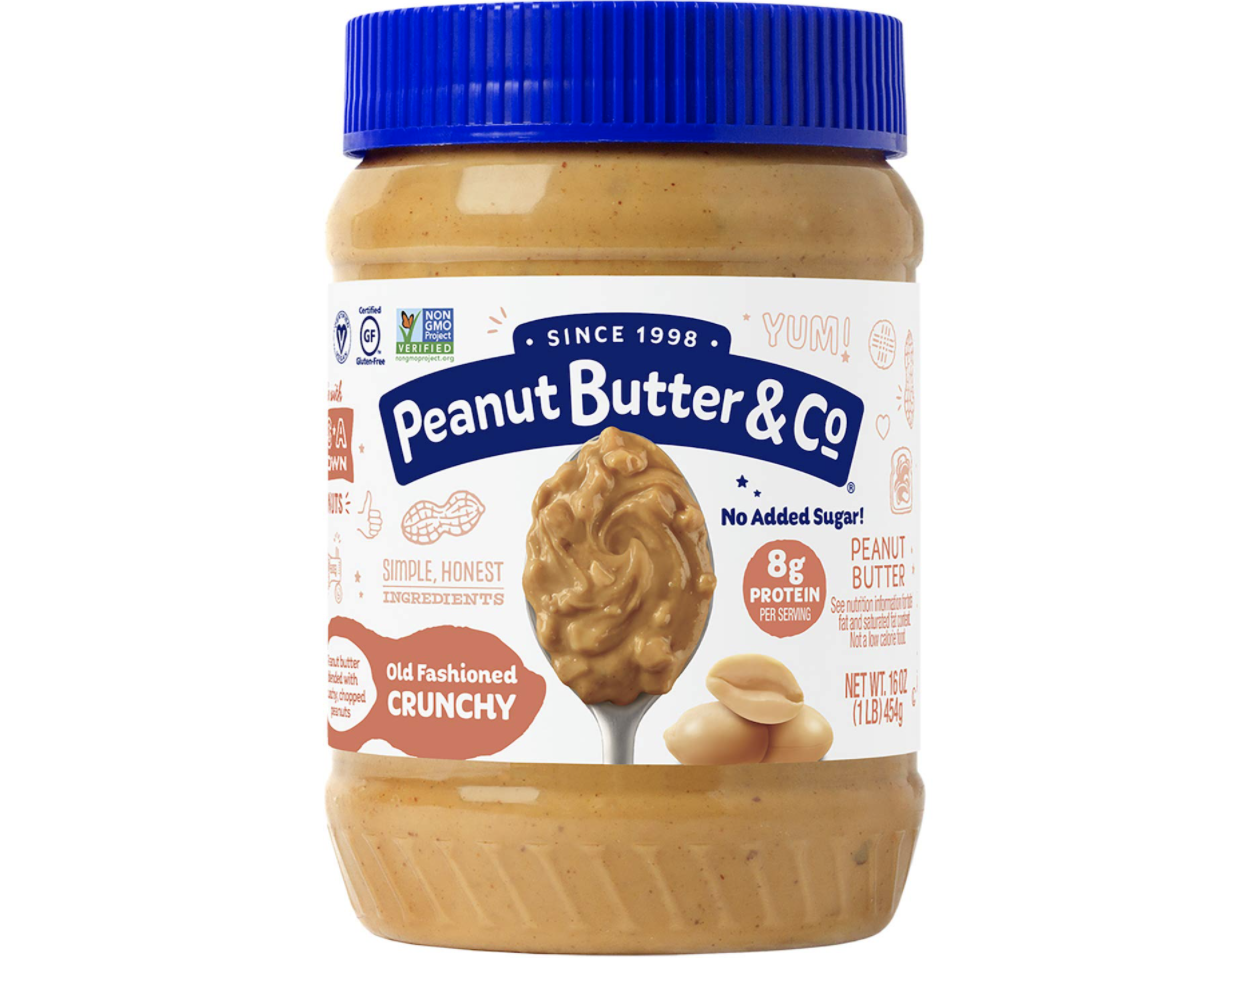 Old Fashioned Crunchy Peanut Butter